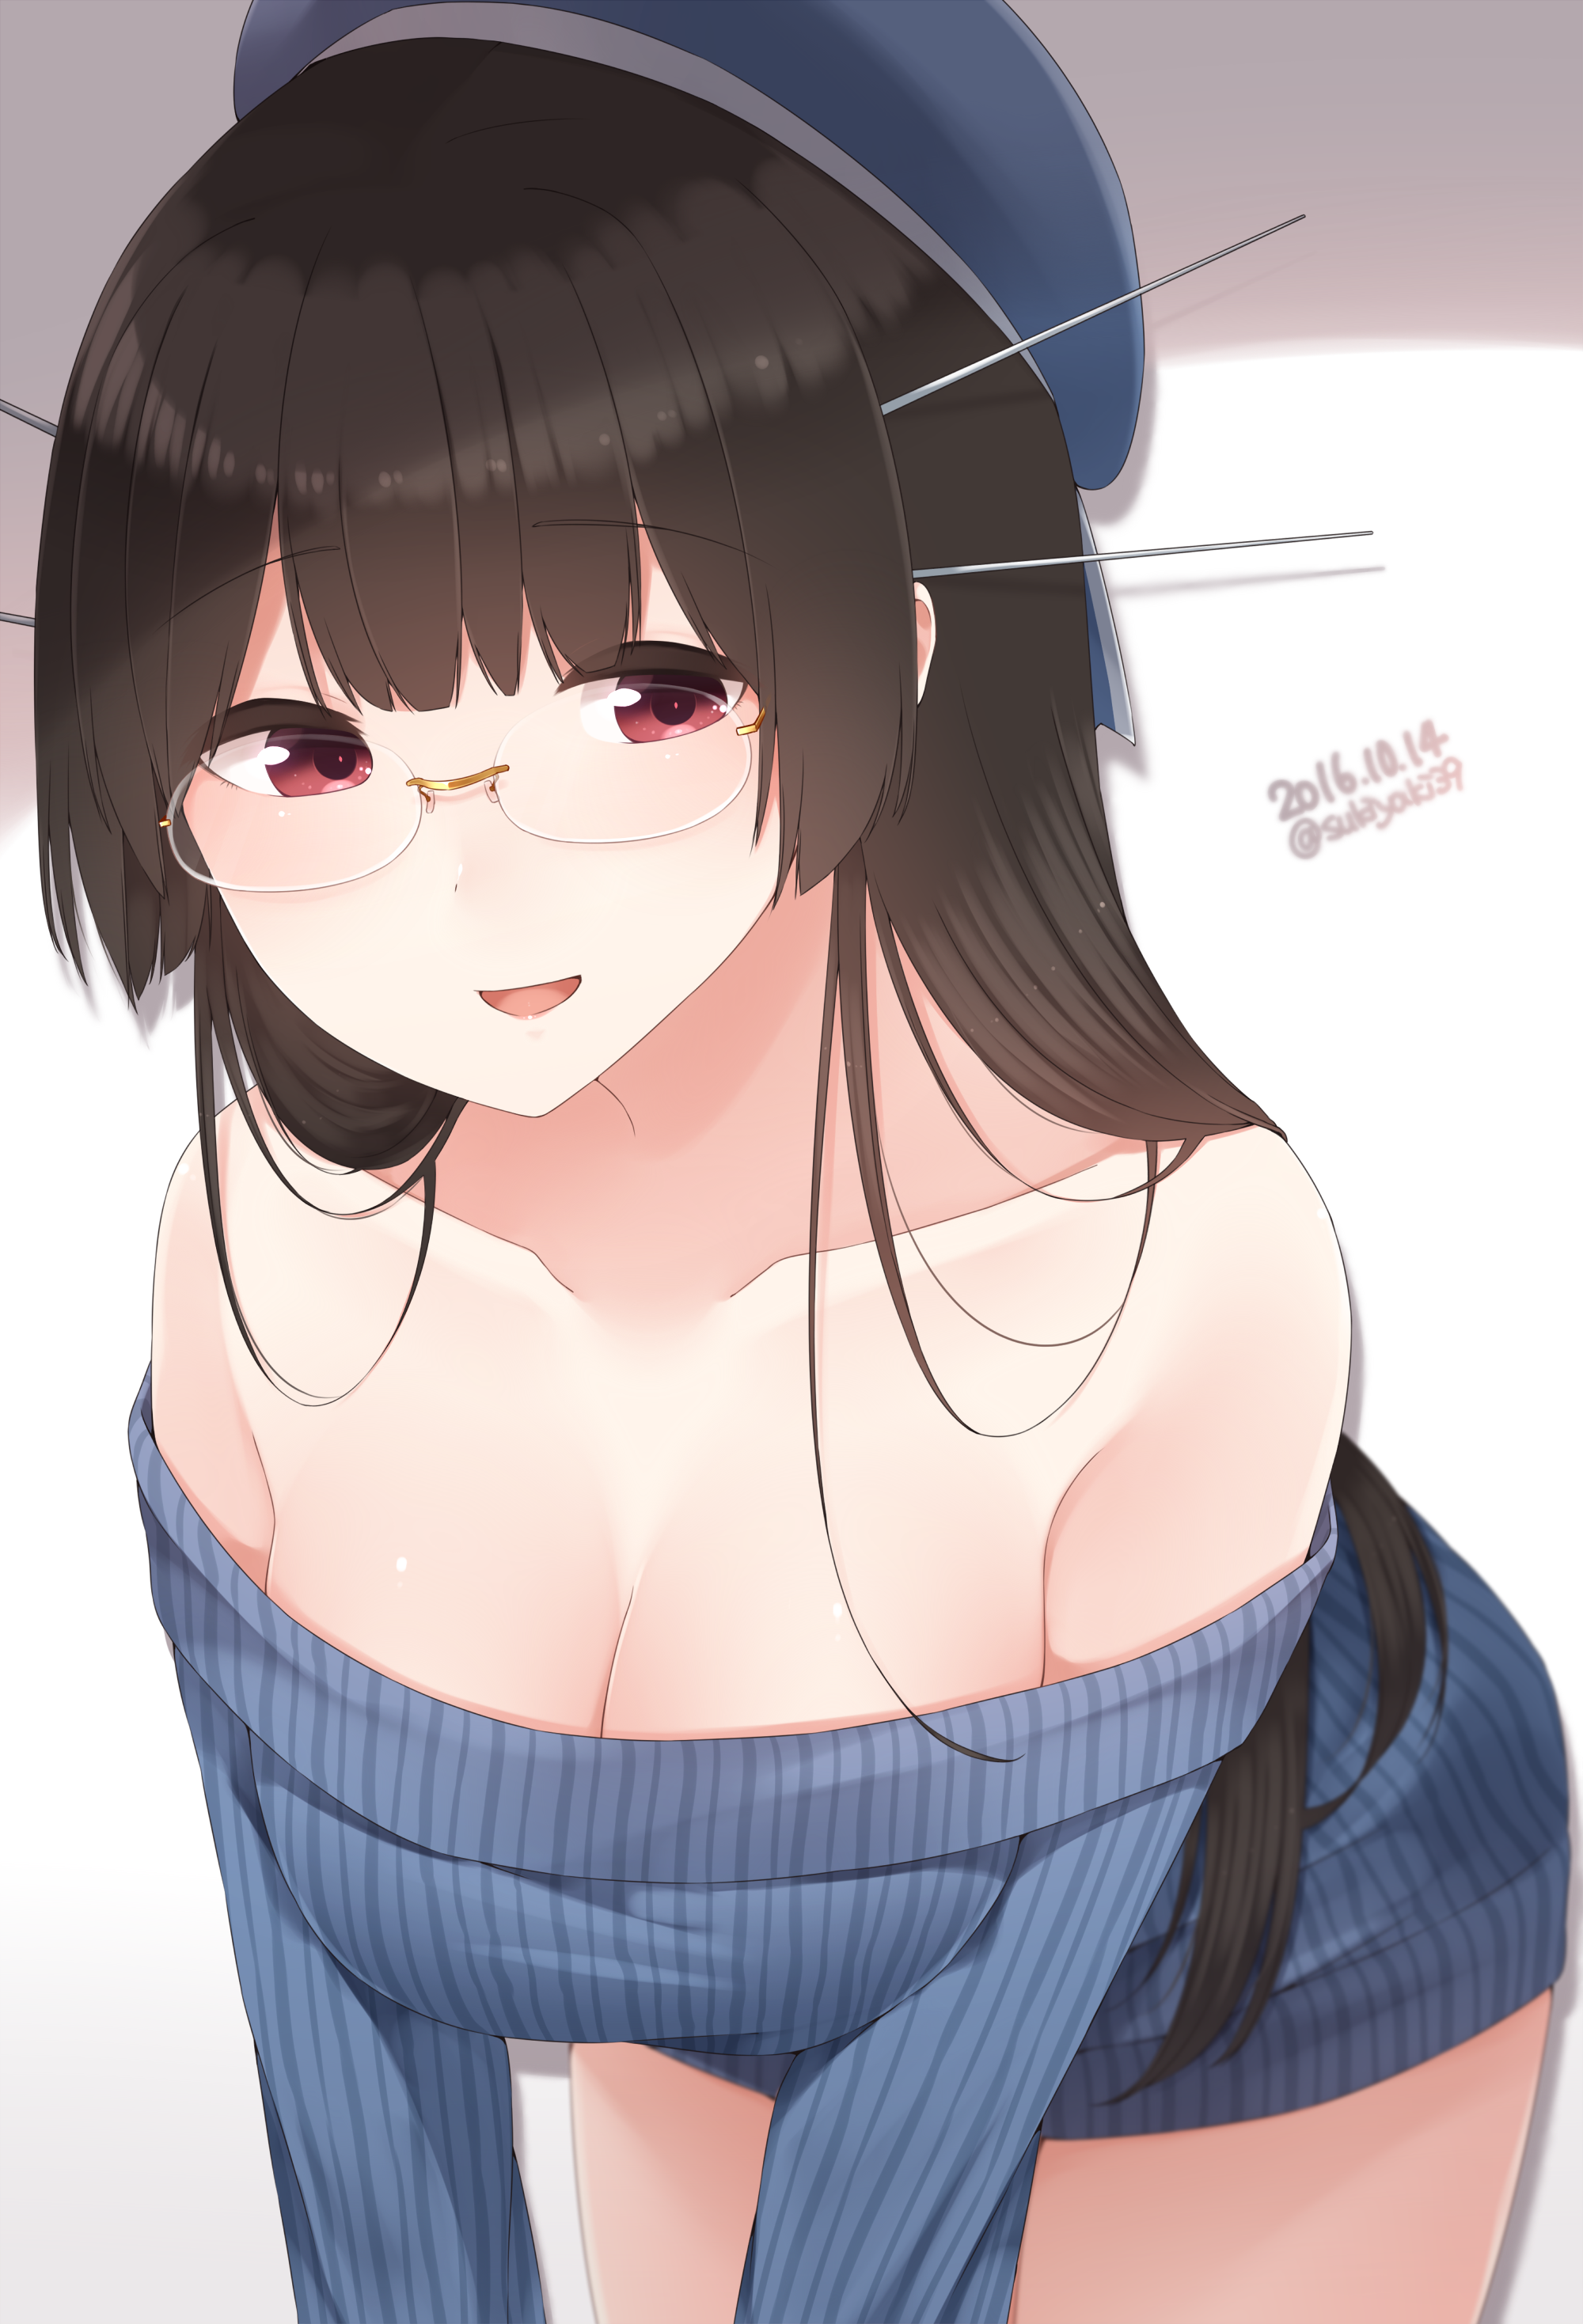 Anime 2000x2937 anime anime girls Kantai Collection long hair brunette red eyes glasses sweater no bra open shirt cleavage